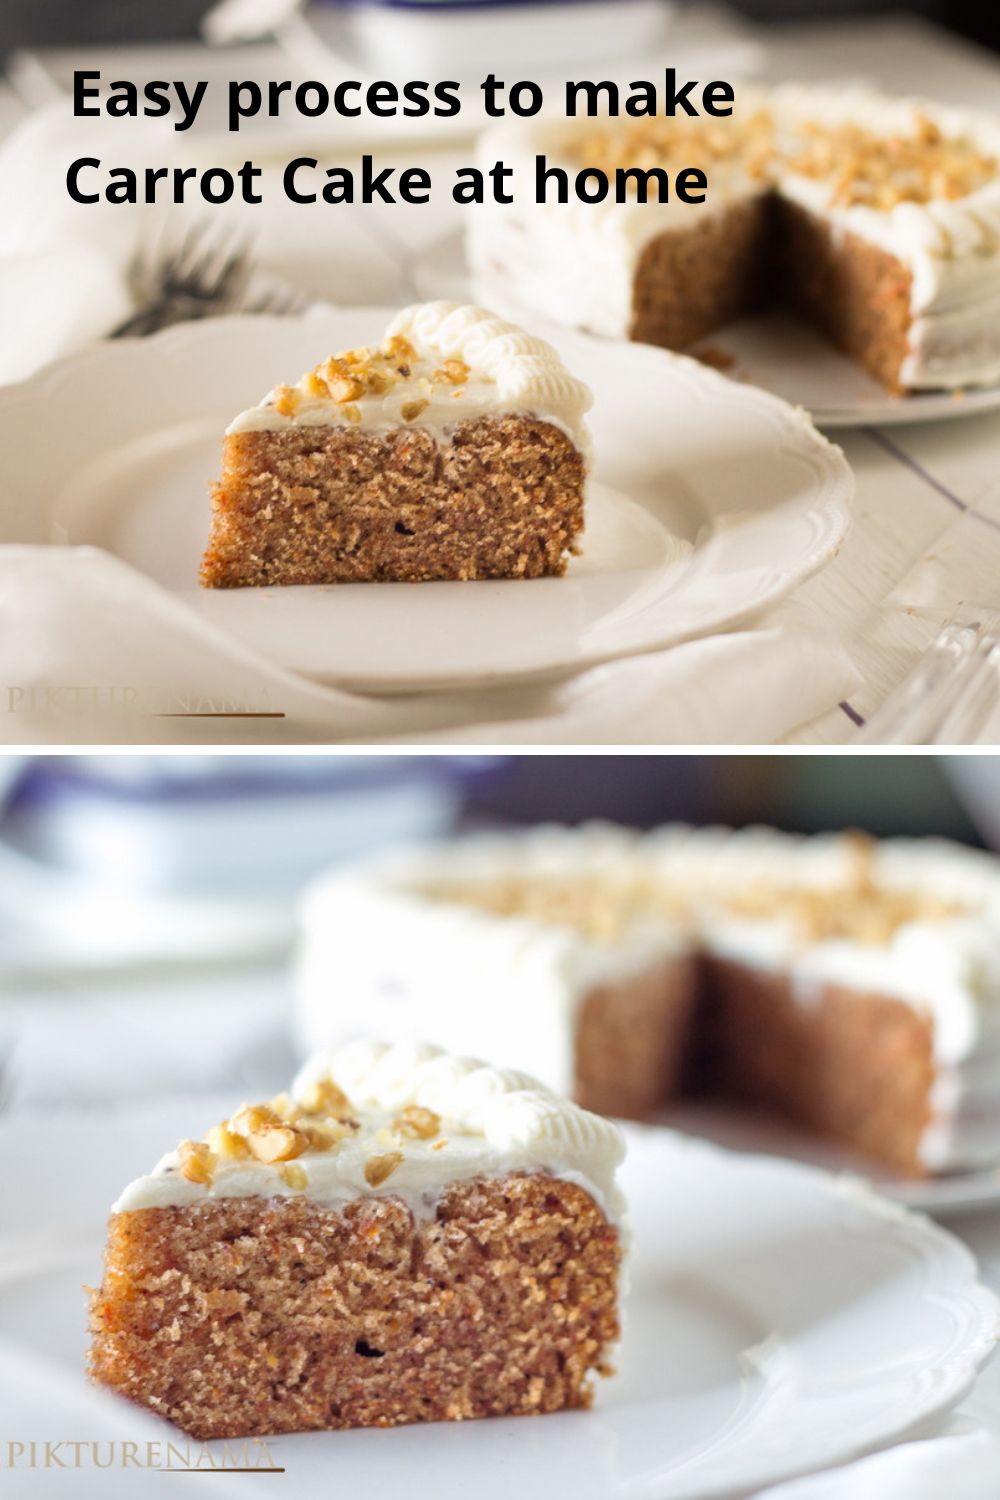 Easy carrot cake at home - 1